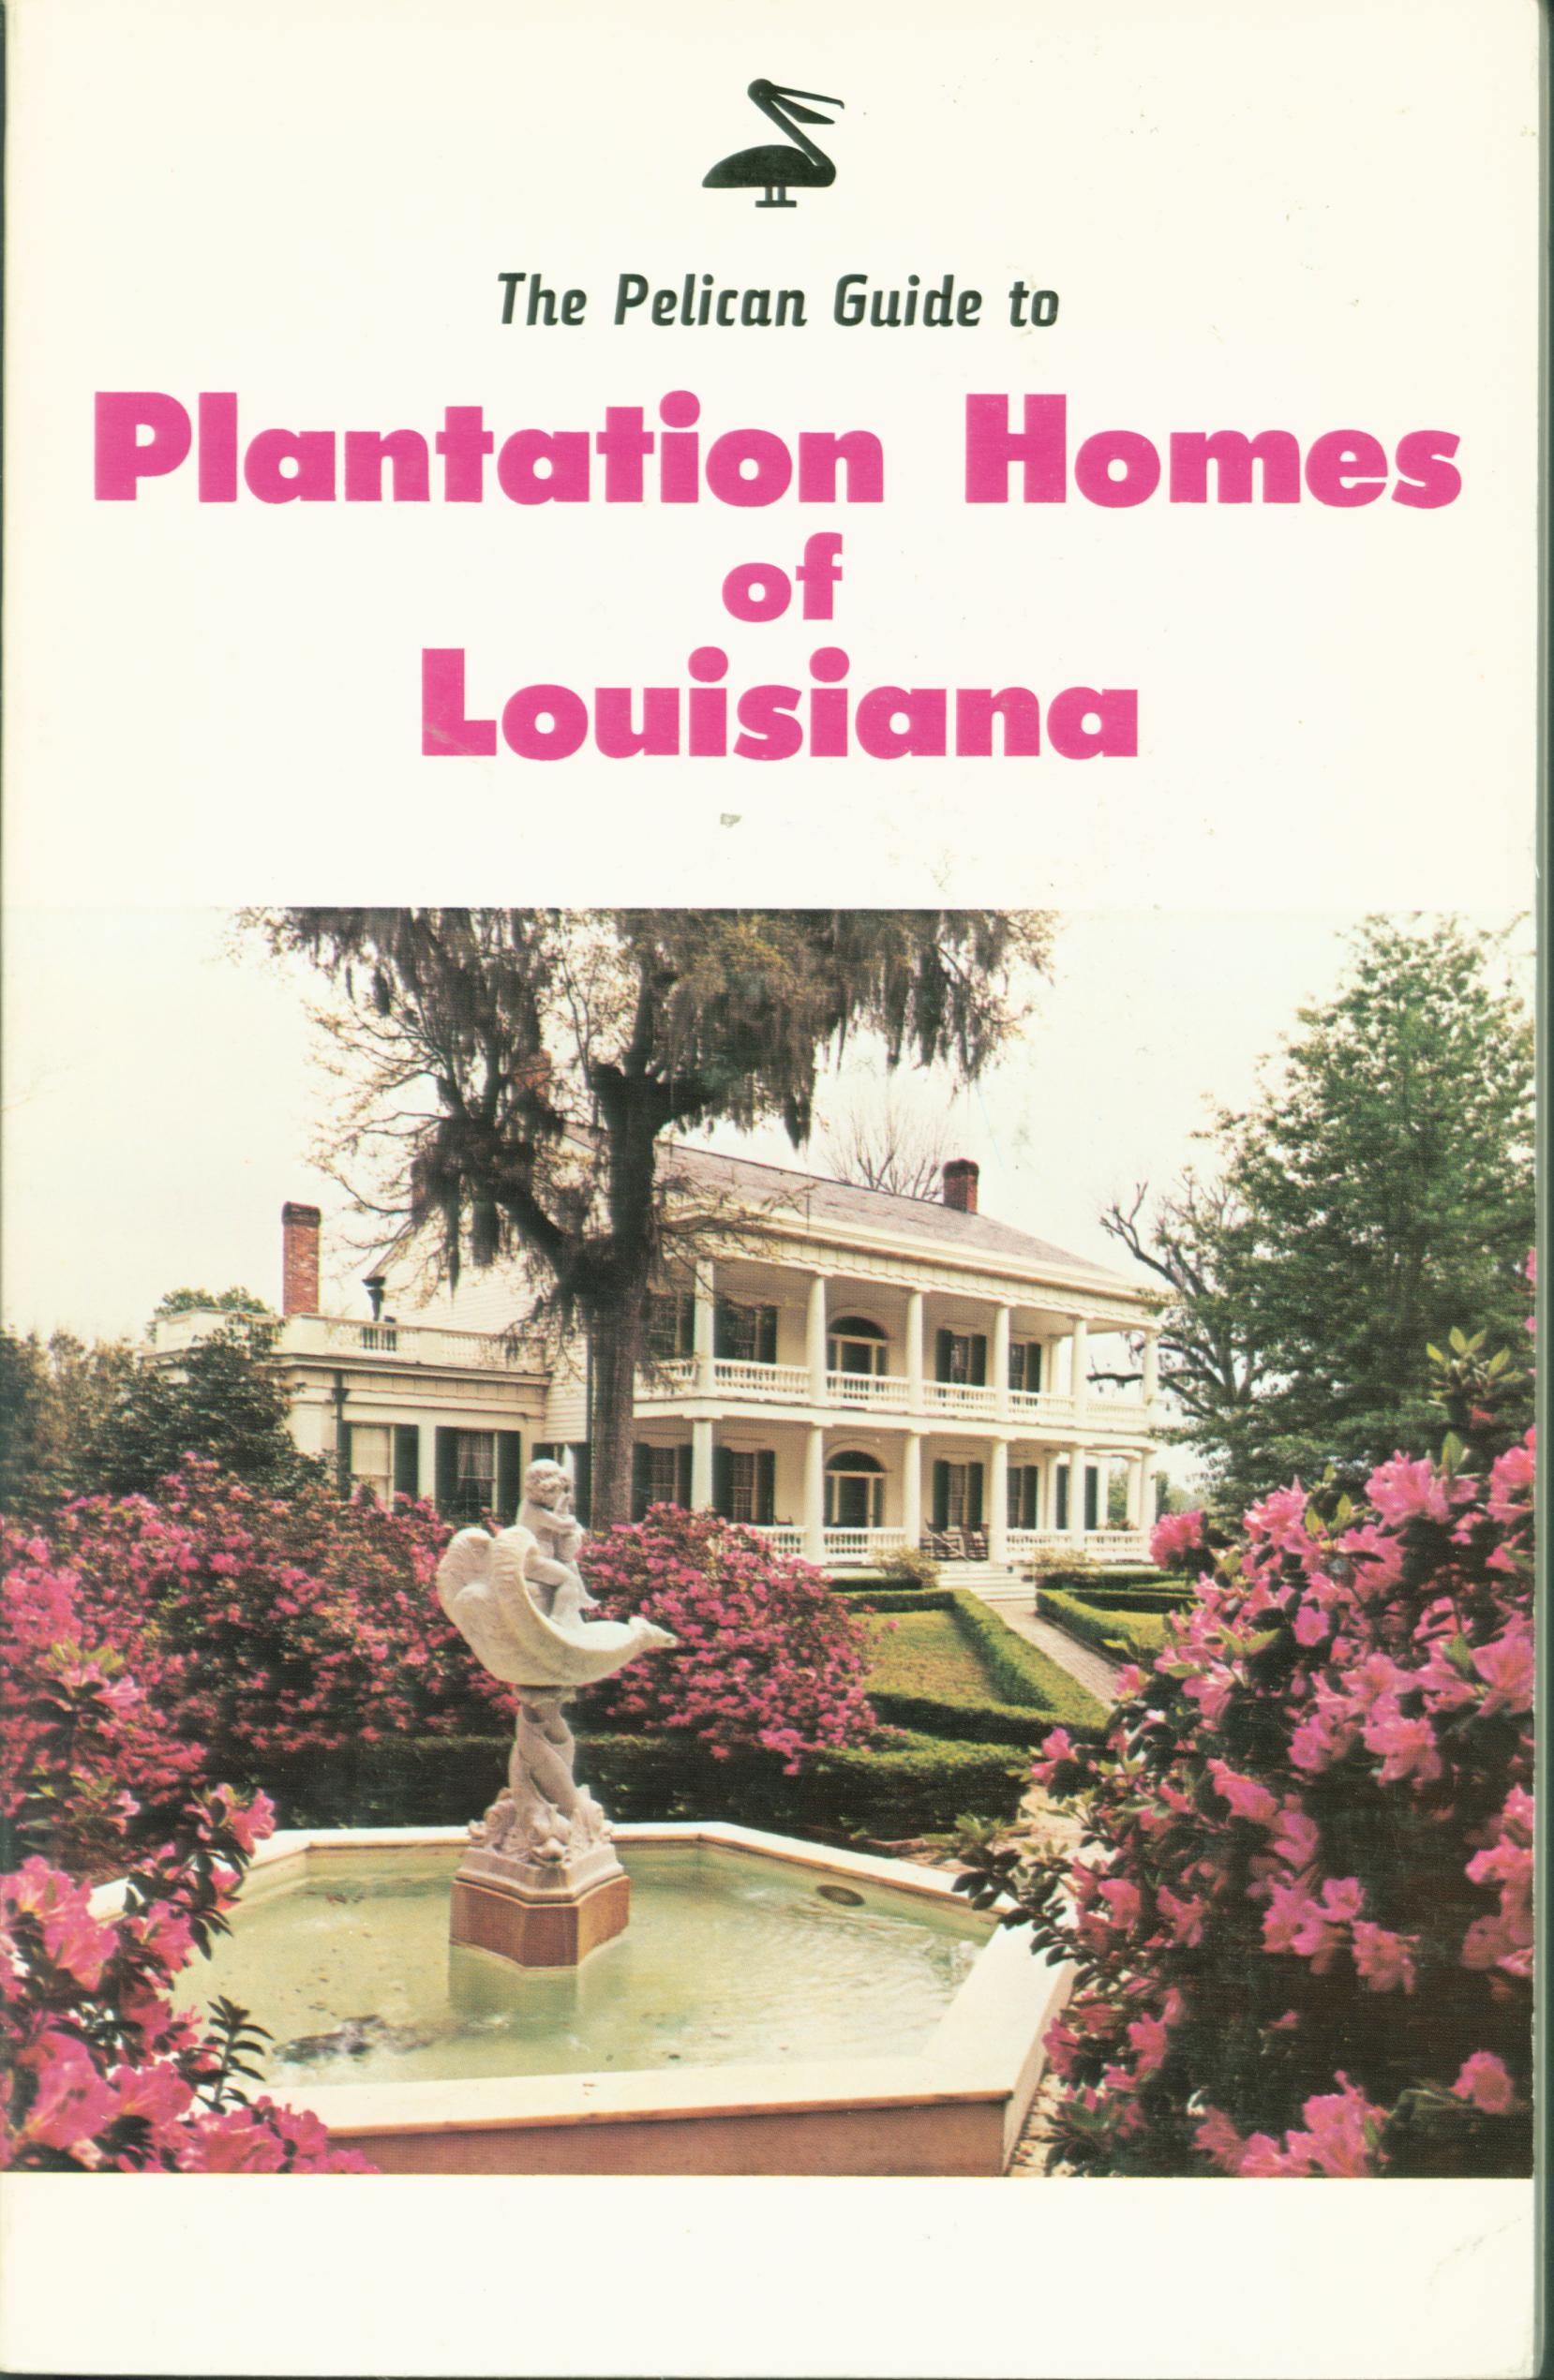 THE PELICAN GUIDE TO PLANTATION HOMES OF LOUISIANA.